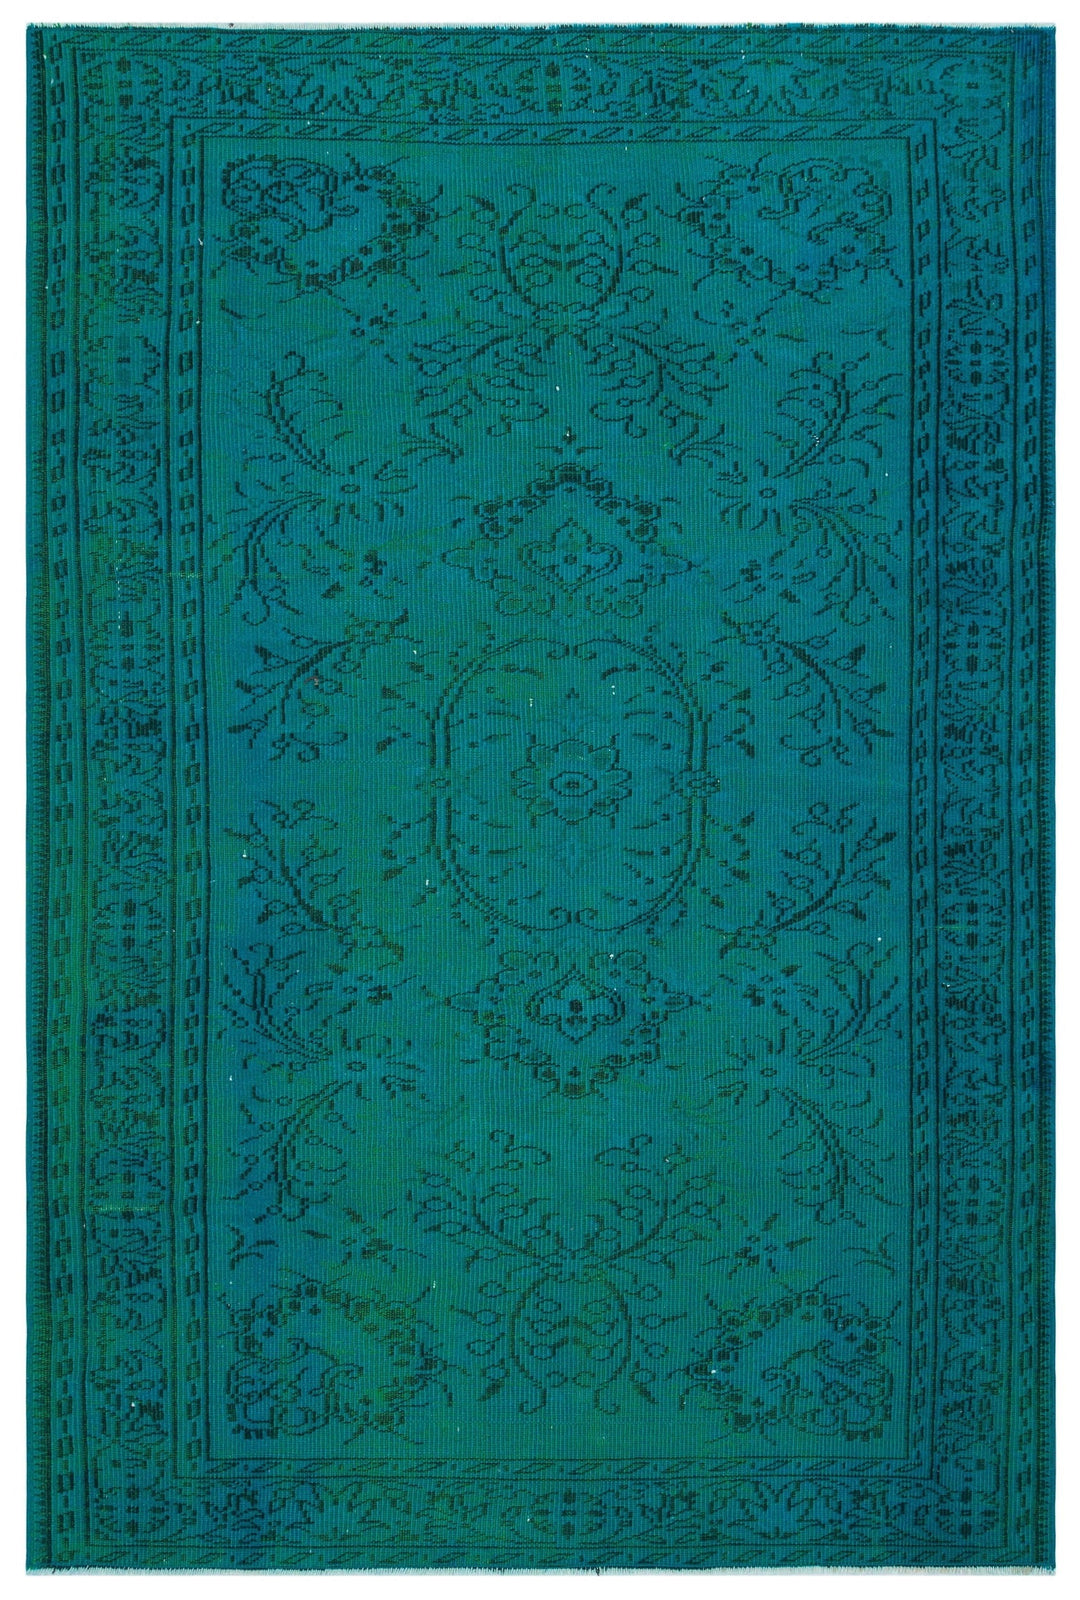 Athens Turquoise Tumbled Wool Hand Woven Carpet 168 x 259